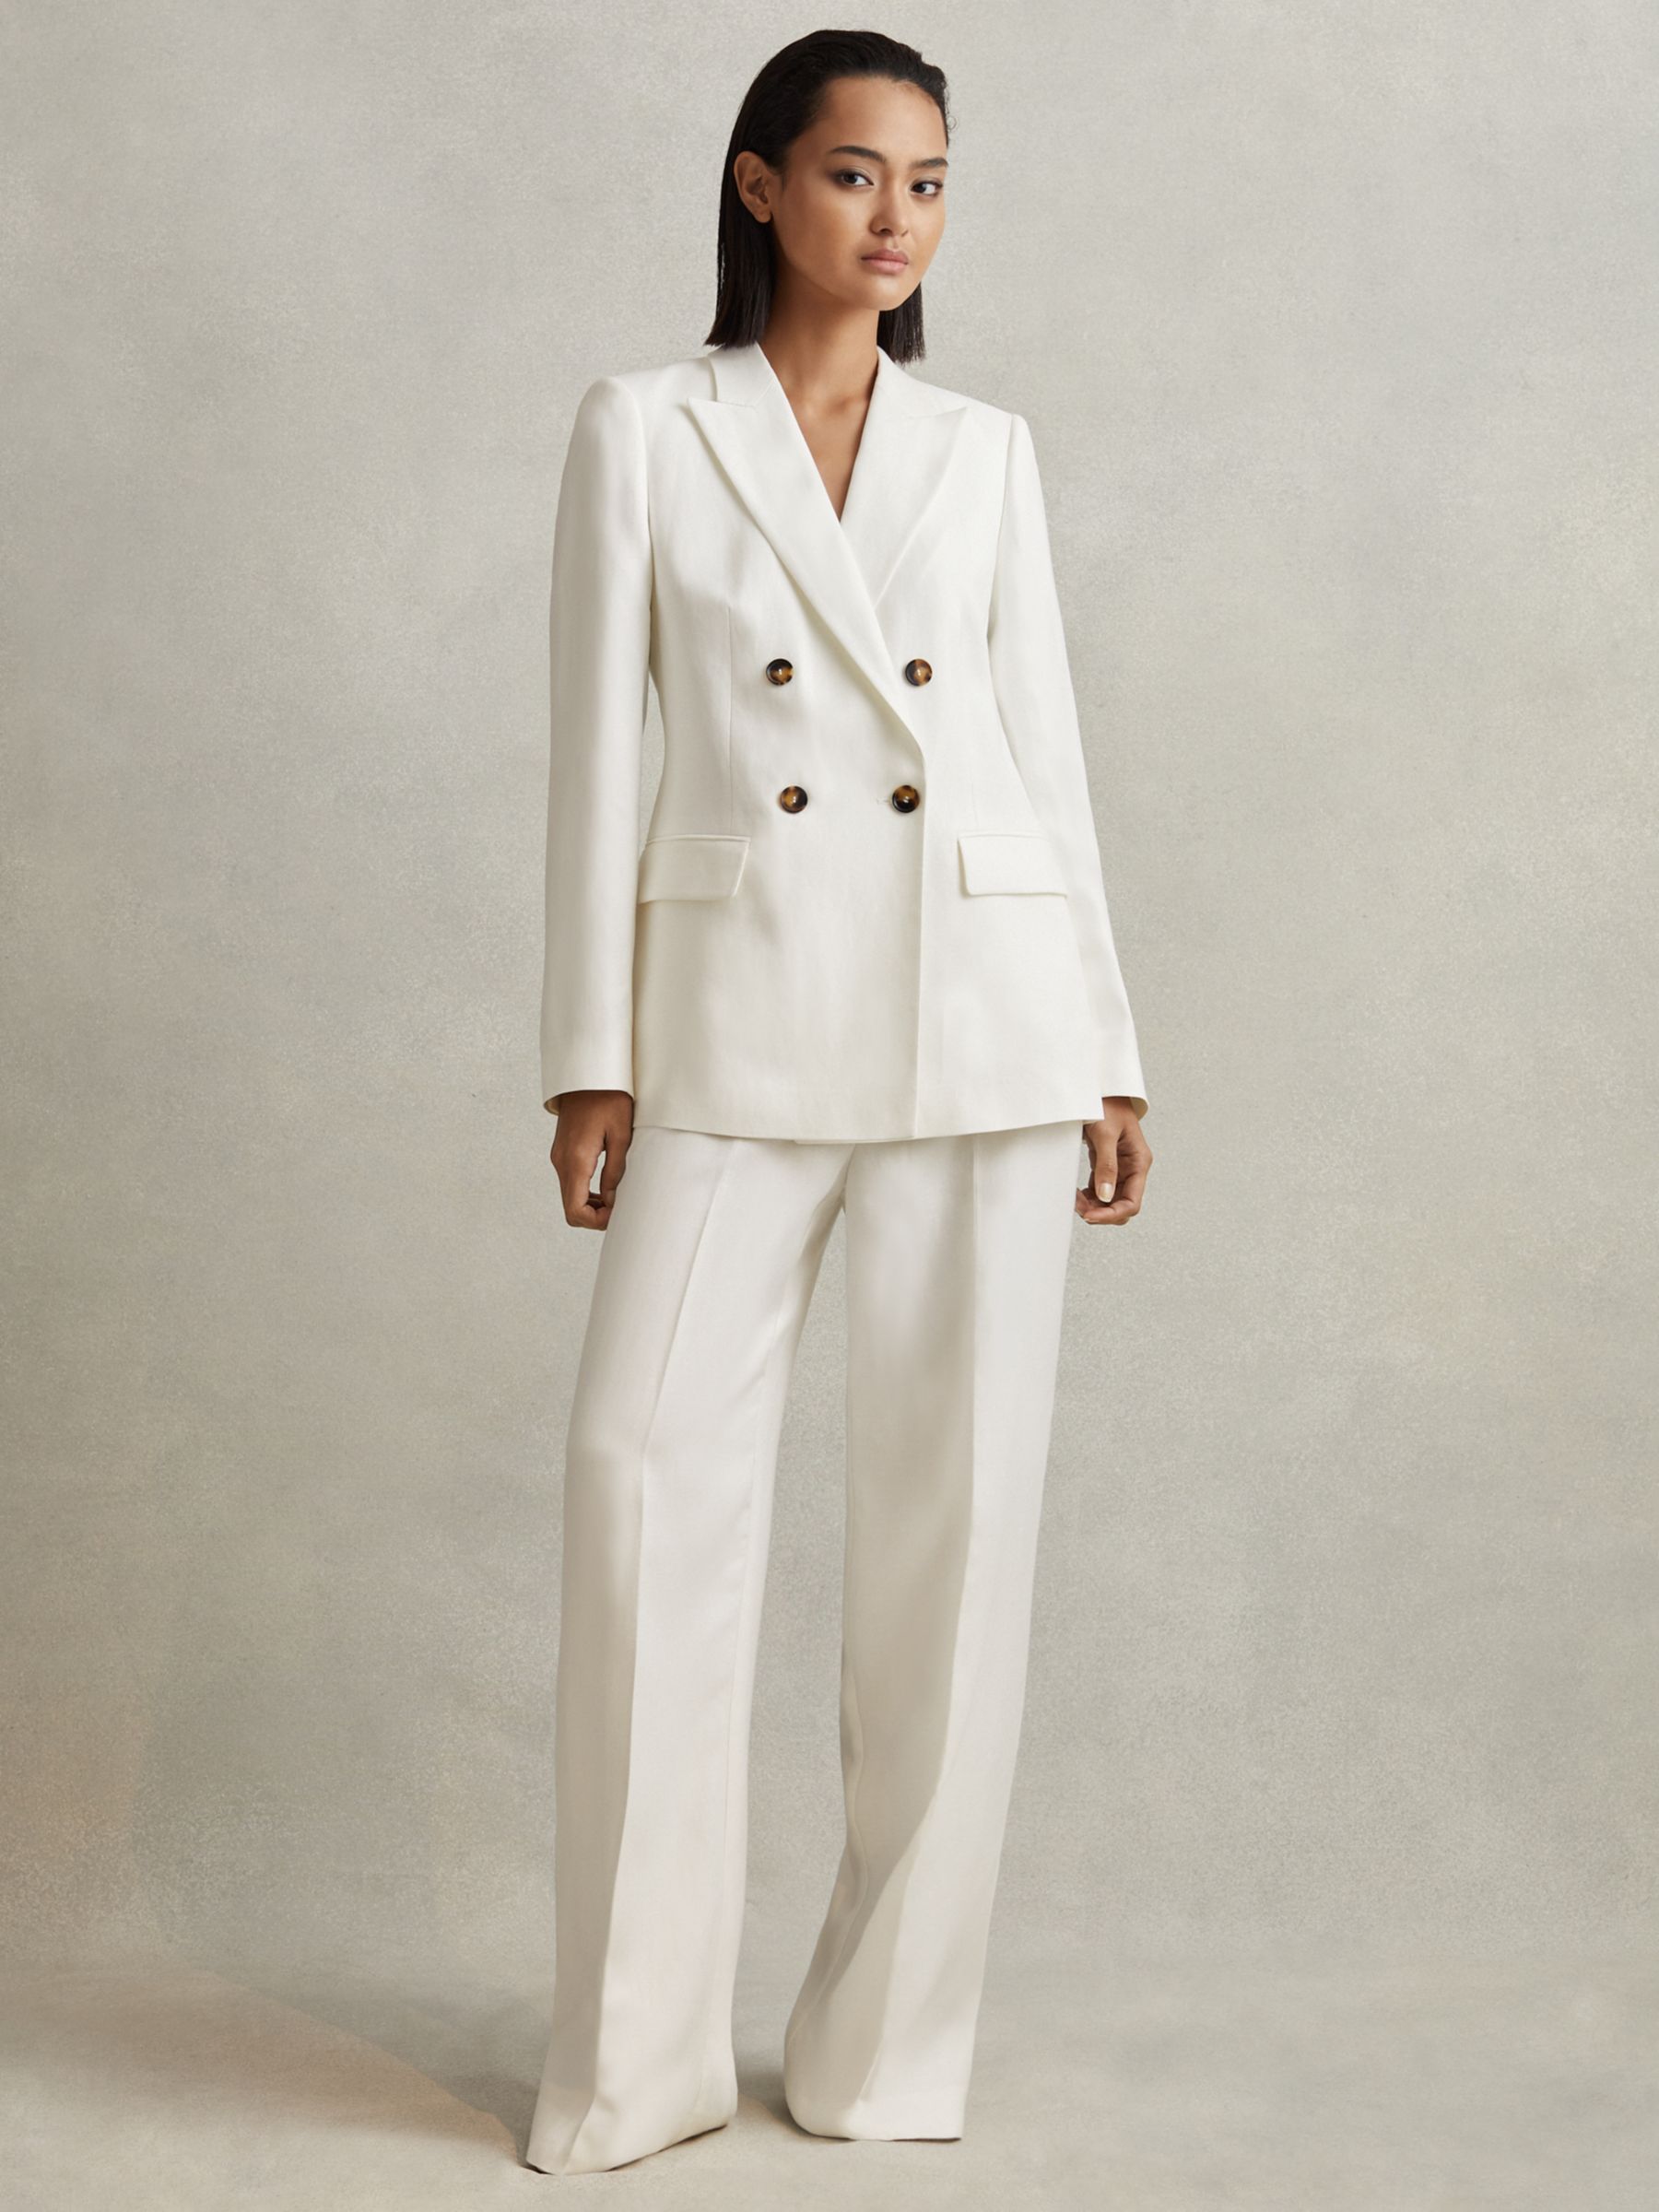 Buy Reiss Lori Linen Blend Double Breasted Blazer Online at johnlewis.com